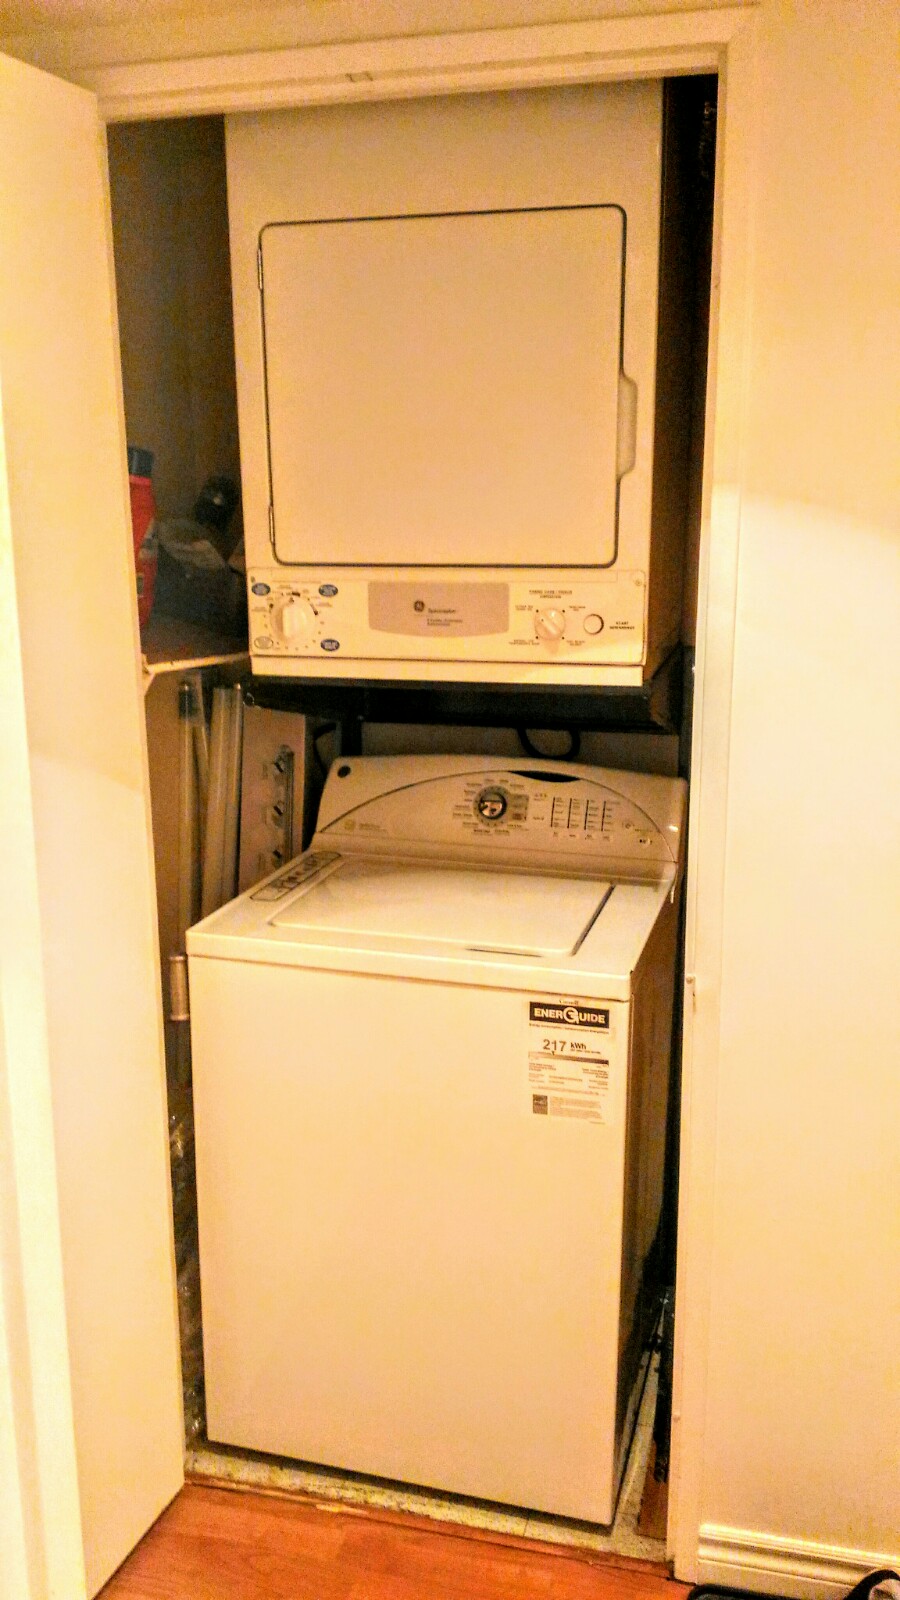 Stackable washer and dryer